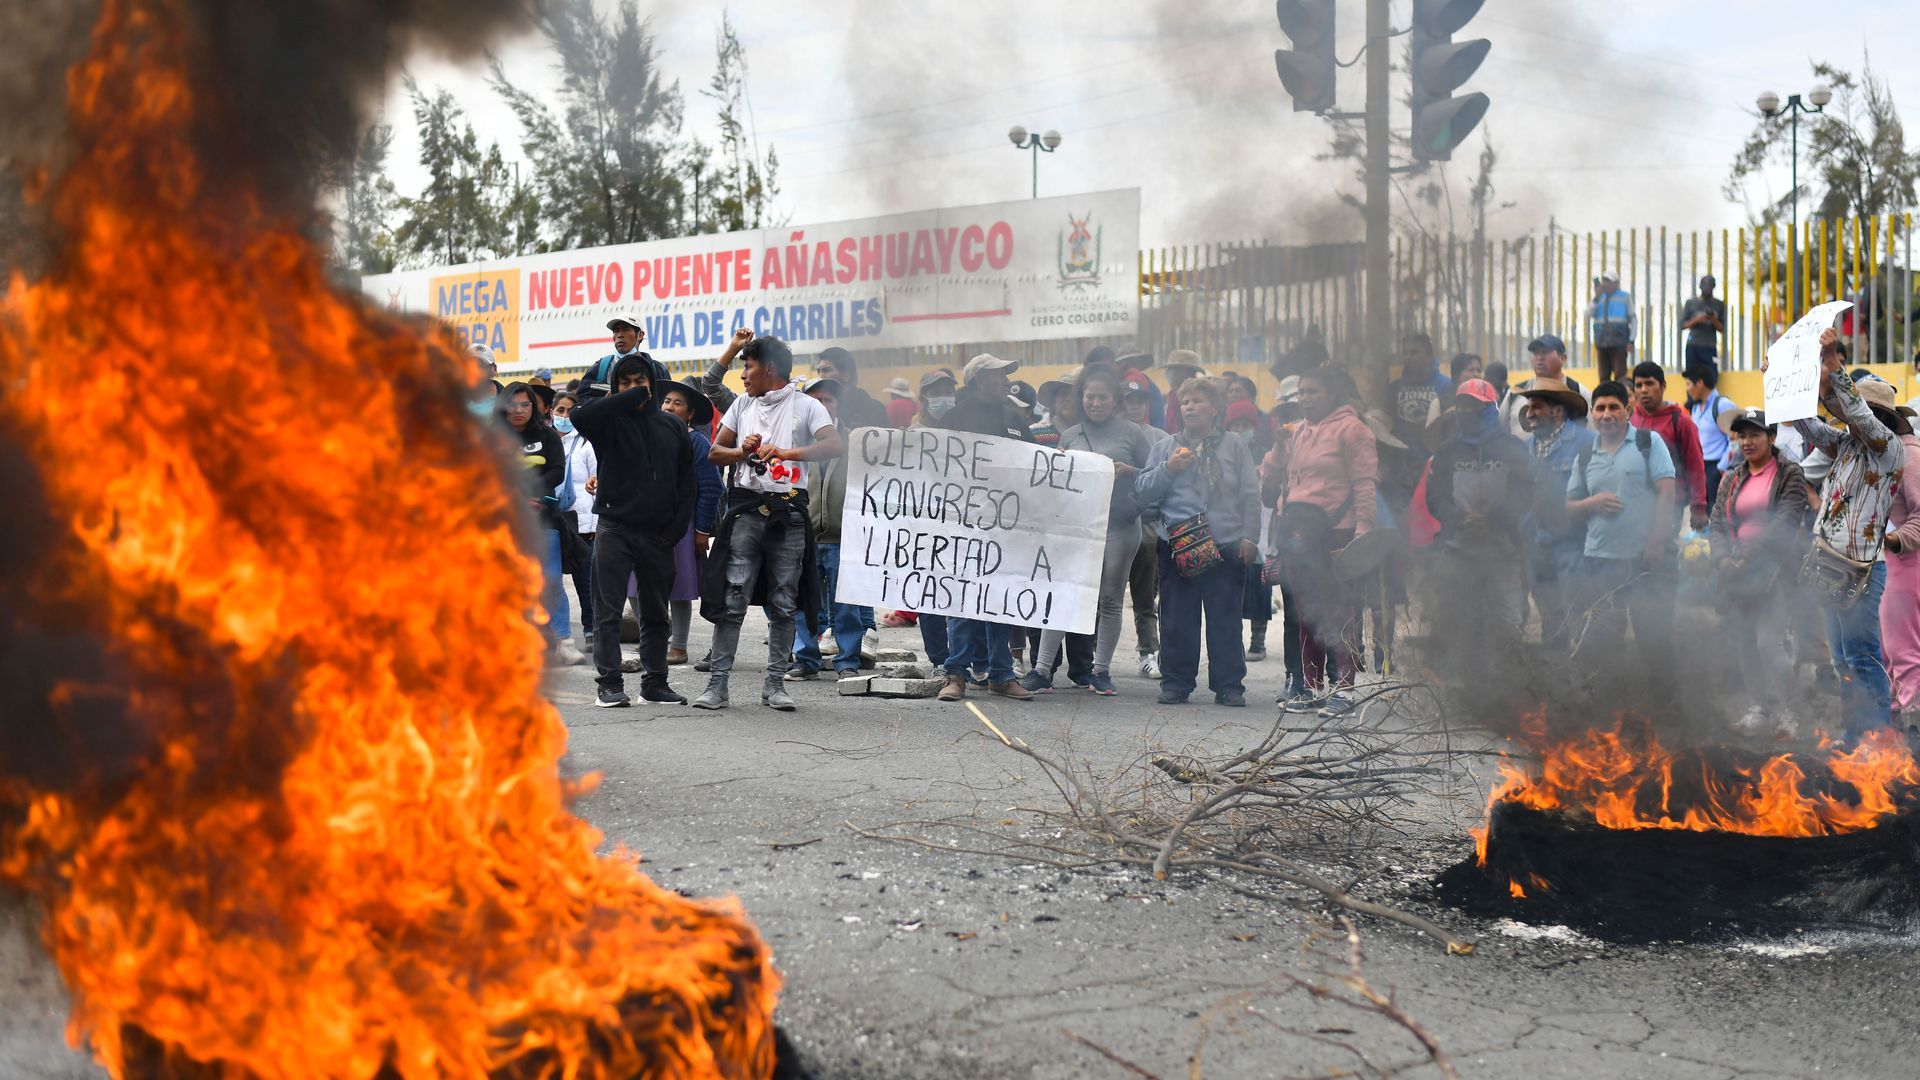 Supporters of Pedro Castillo hold a sign criticizing Congress in Arequipa, Peru, Dec. 12. Photo: Diego Ramos/AFP via Getty Images